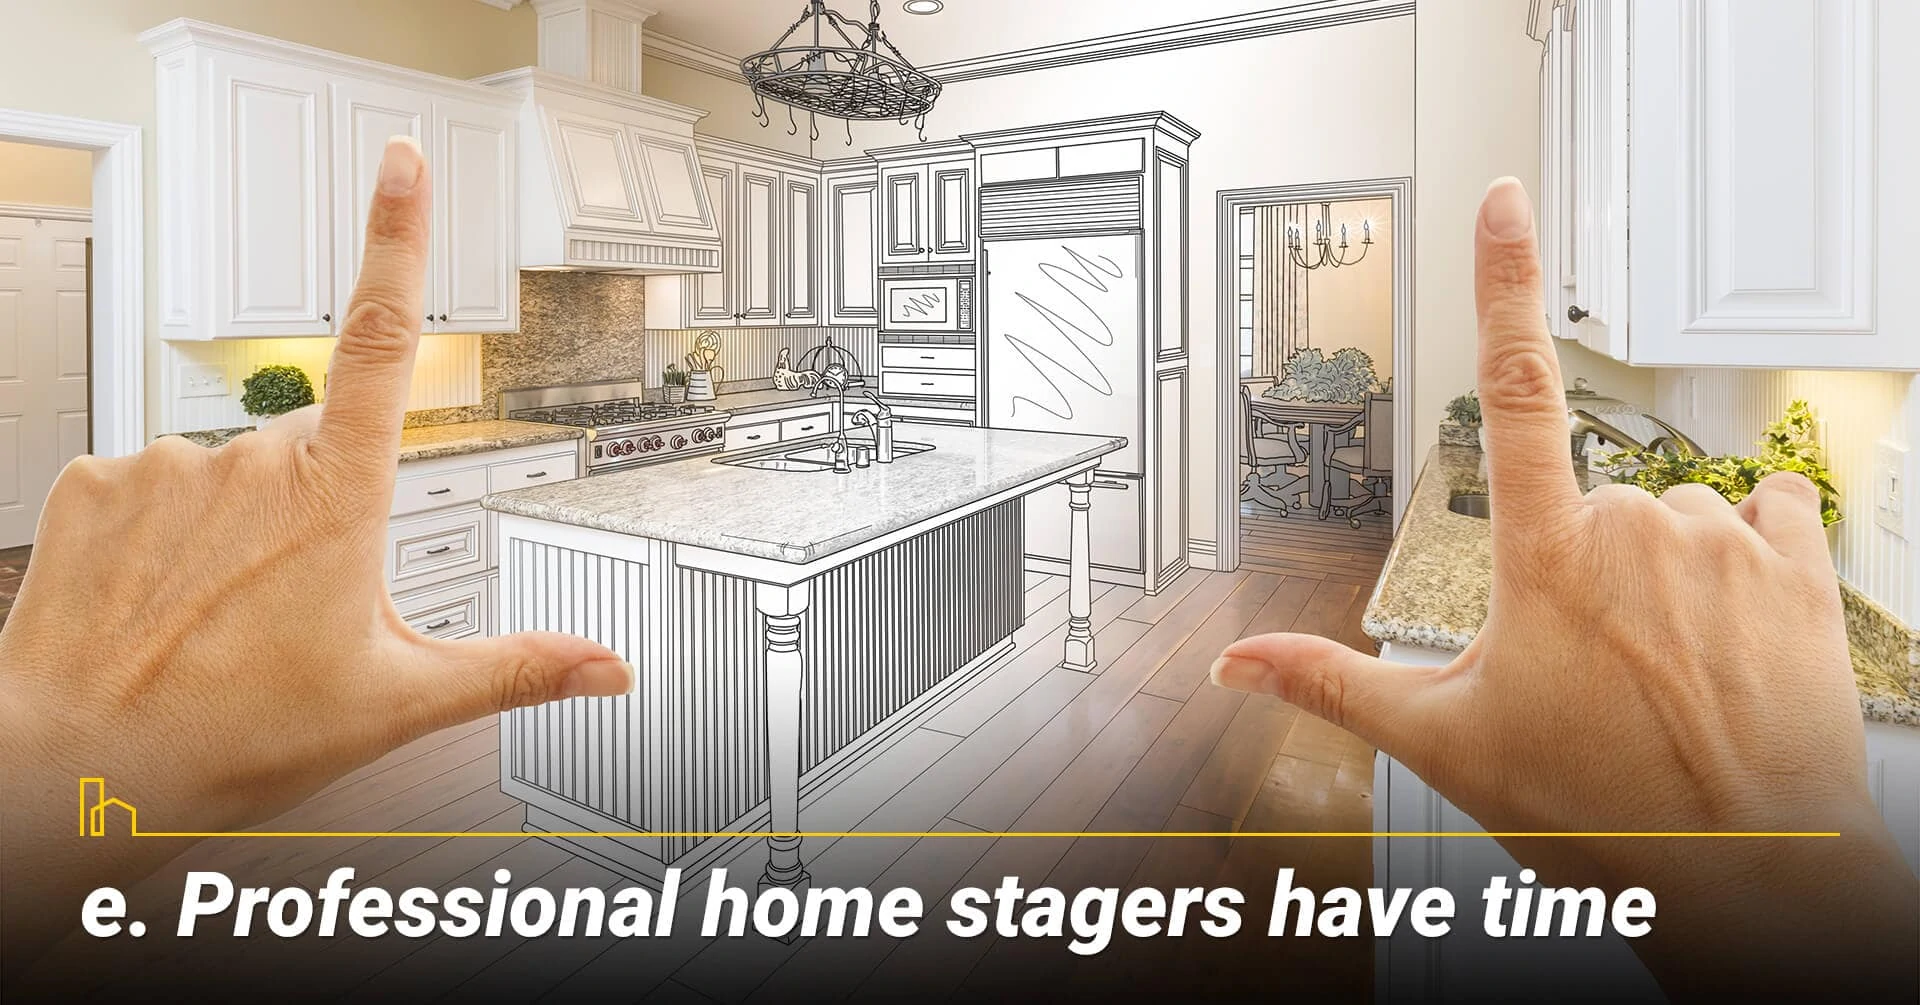 Professional home stagers have time, it takes time to stage a home professionally